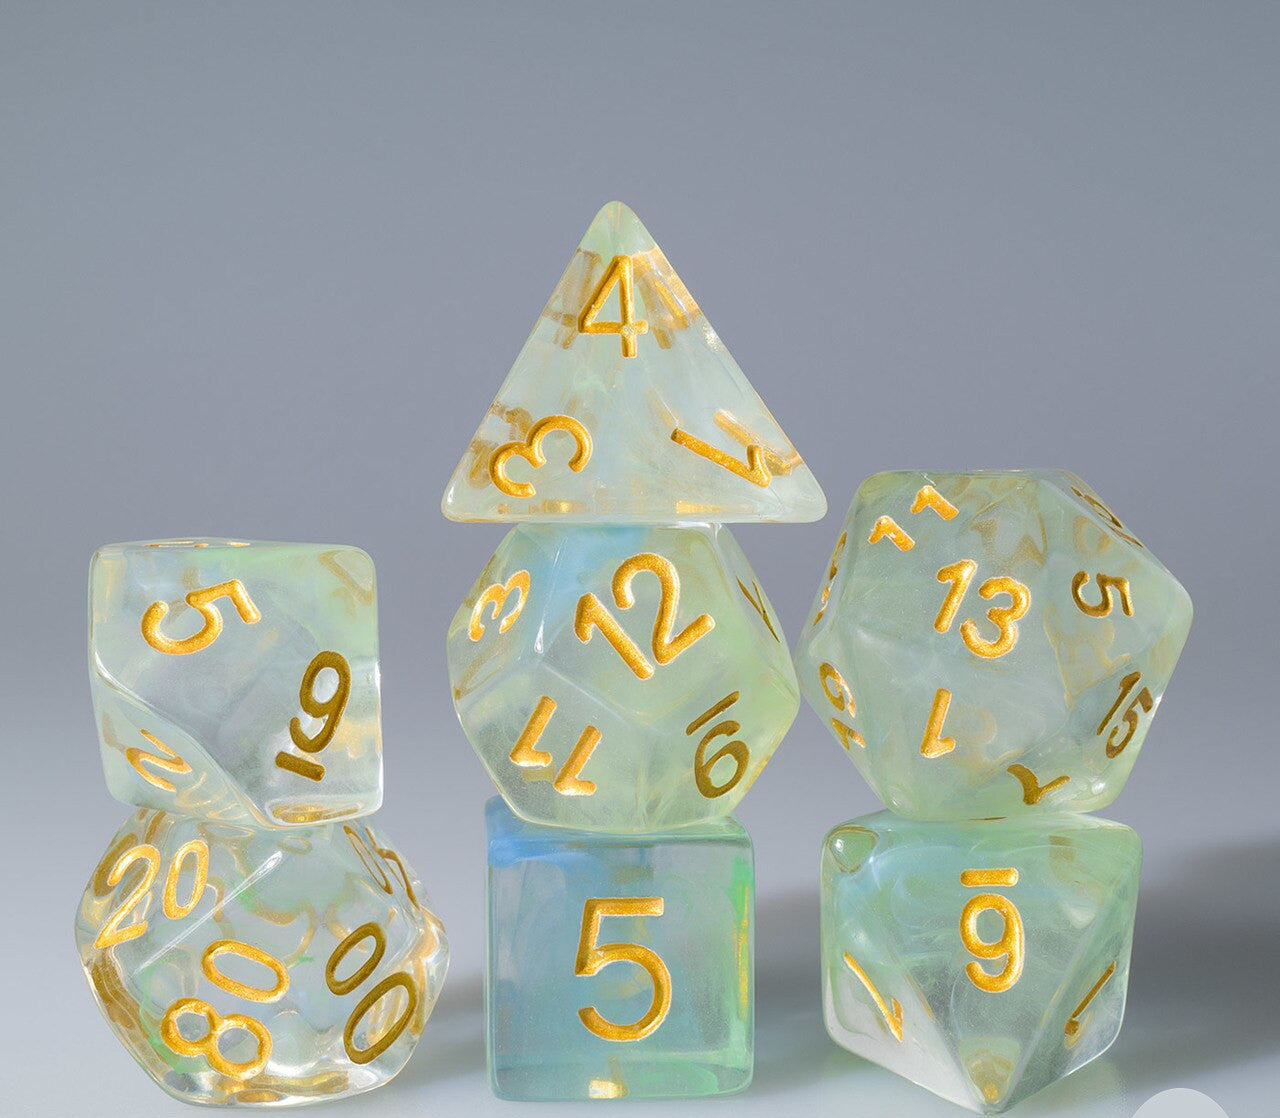 Teal and Light Green Swirl with Gold ink 7pc Polyhedral Dice Set